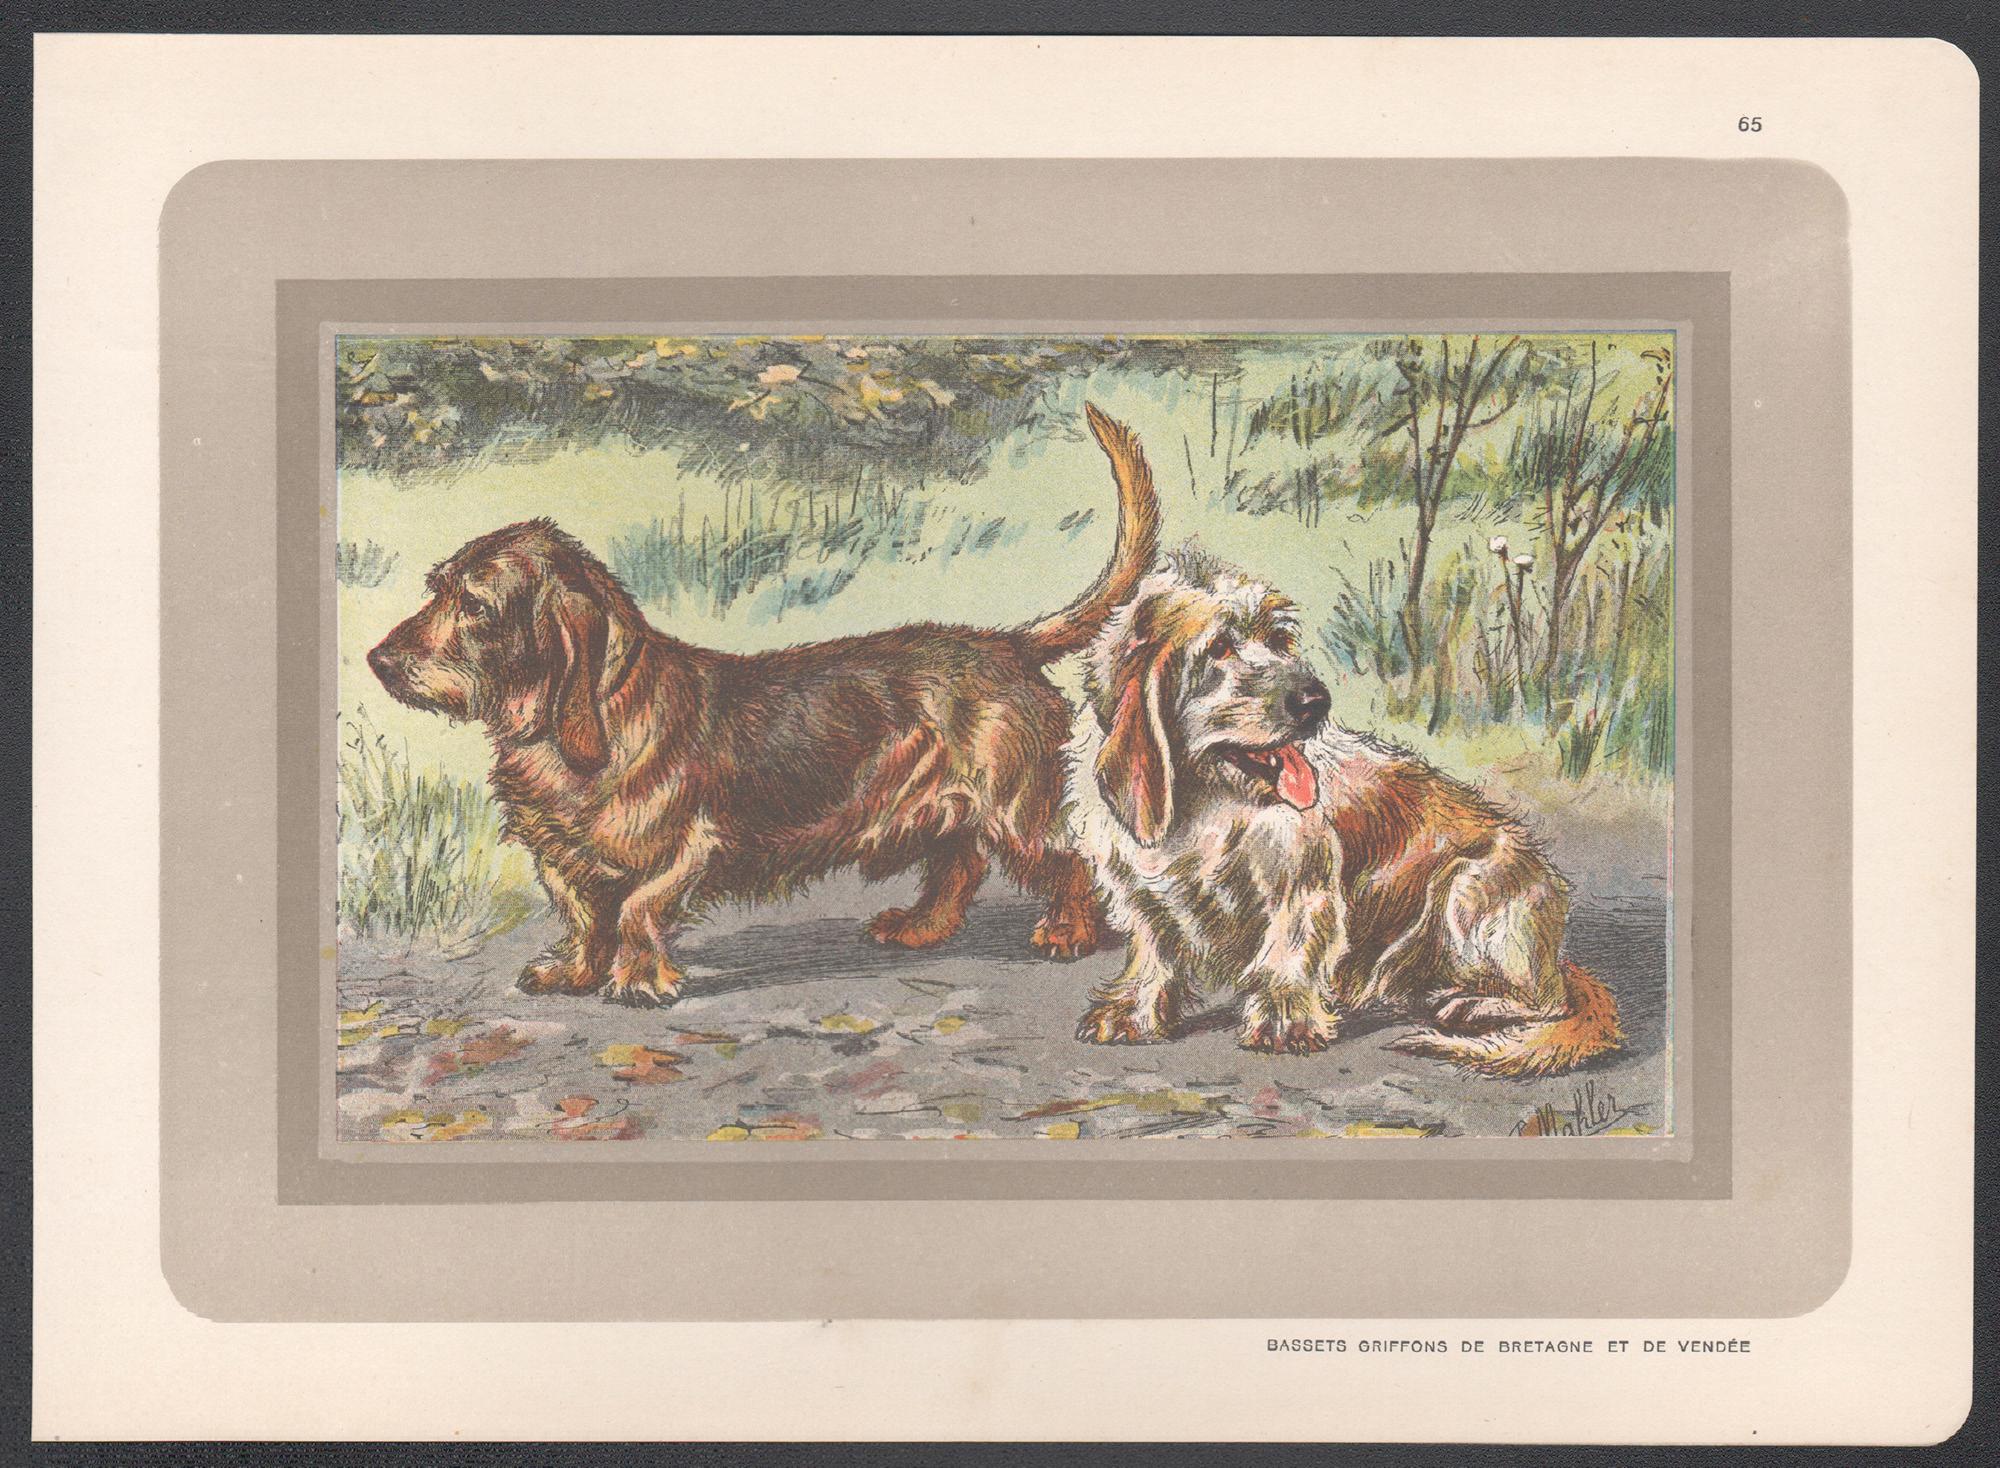 Bassets Griffons, French hound dog chromolithograph print, 1930s - Print by P. Mahler